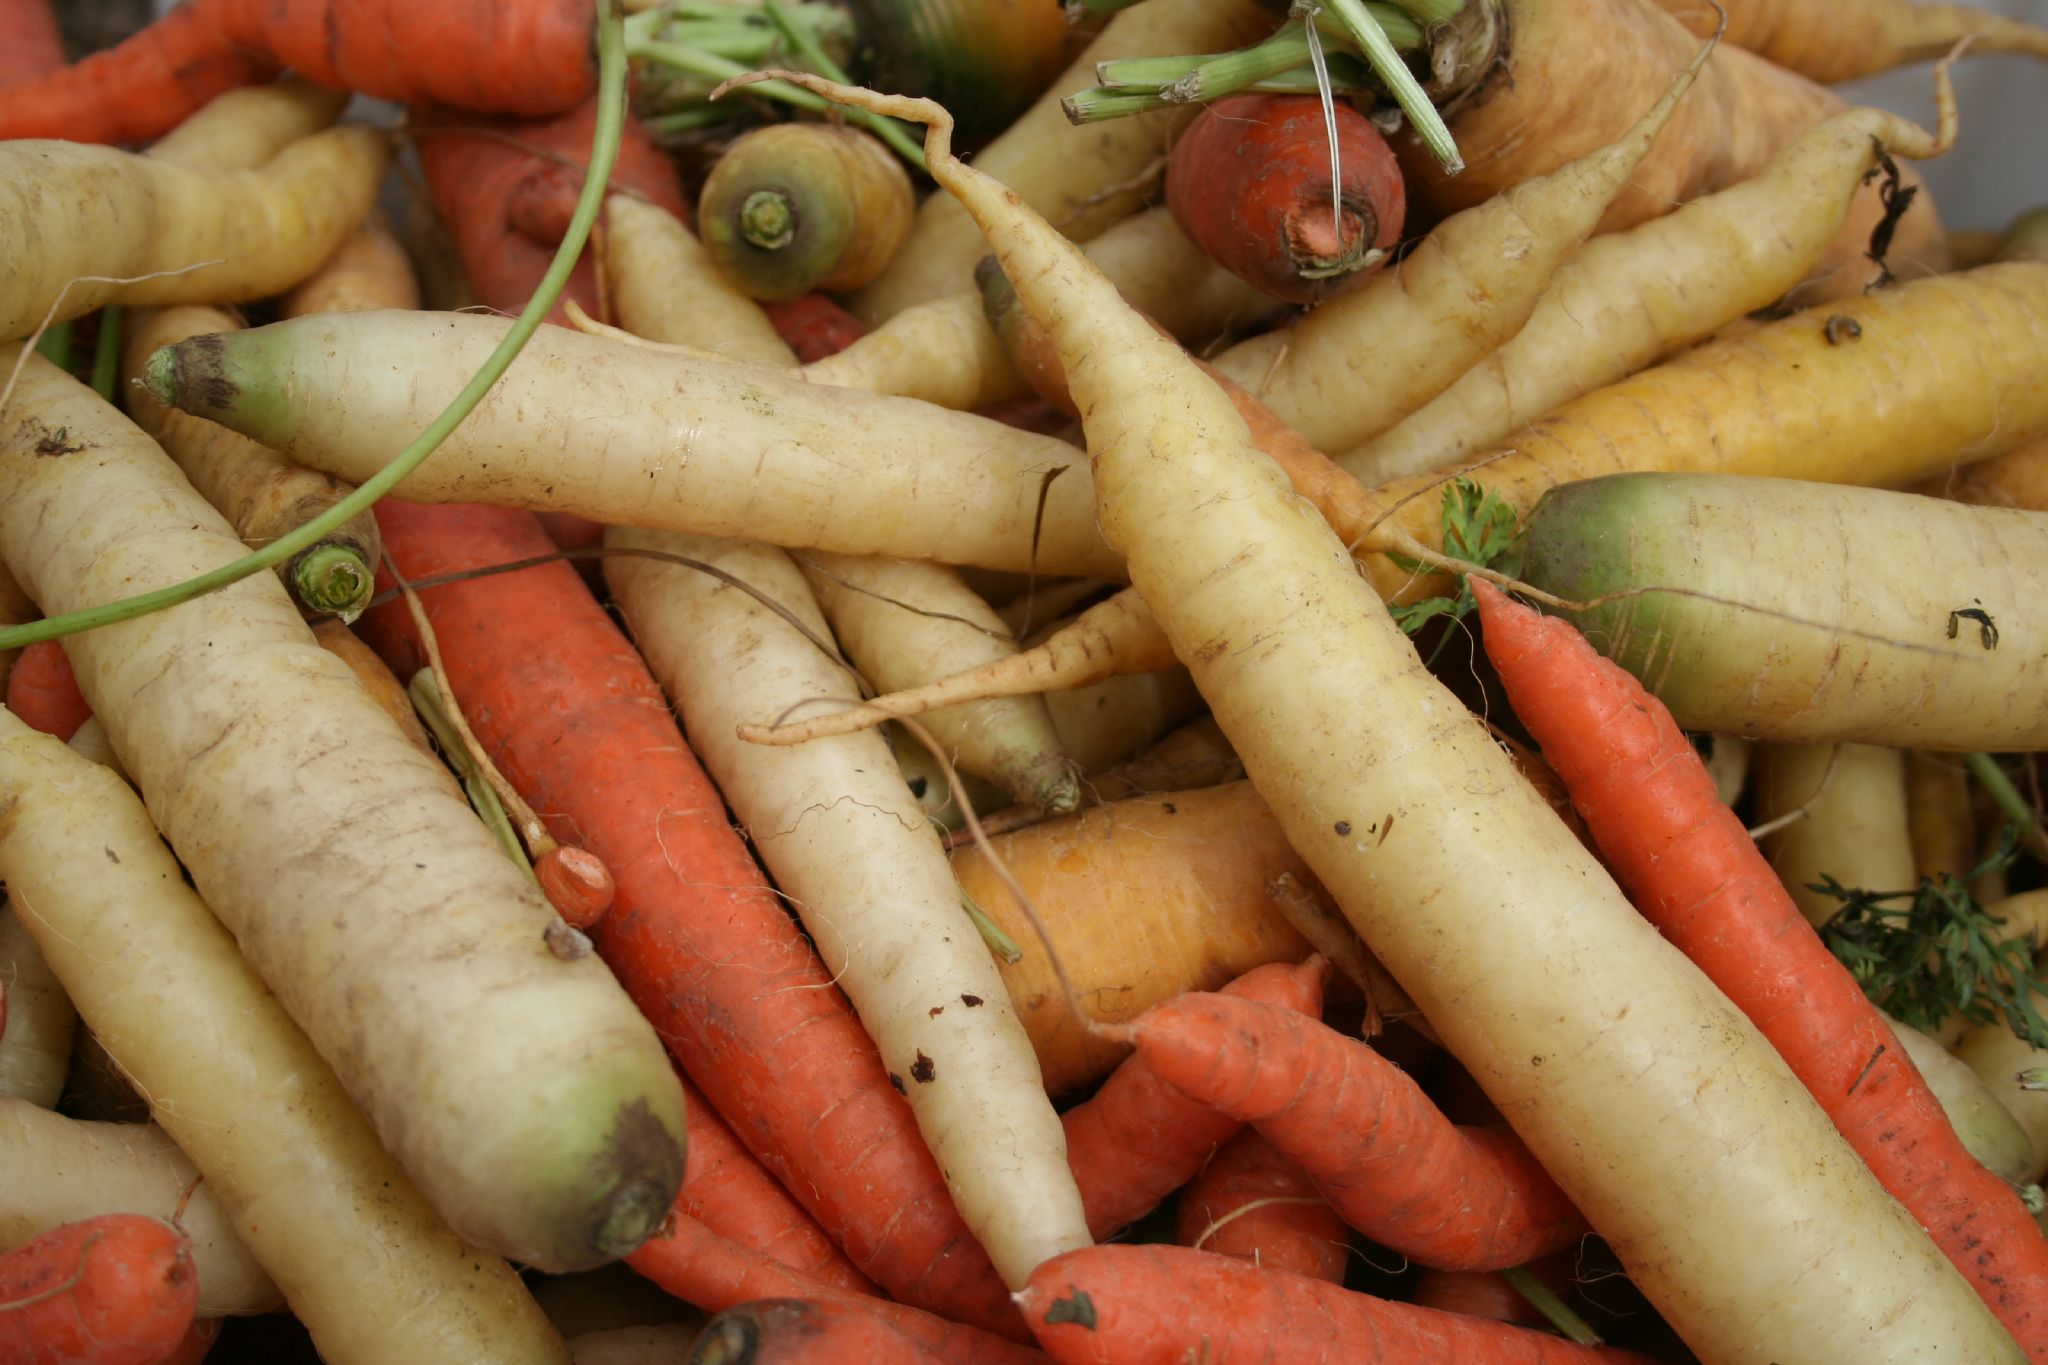 root carrots and radishes piled up in a pile